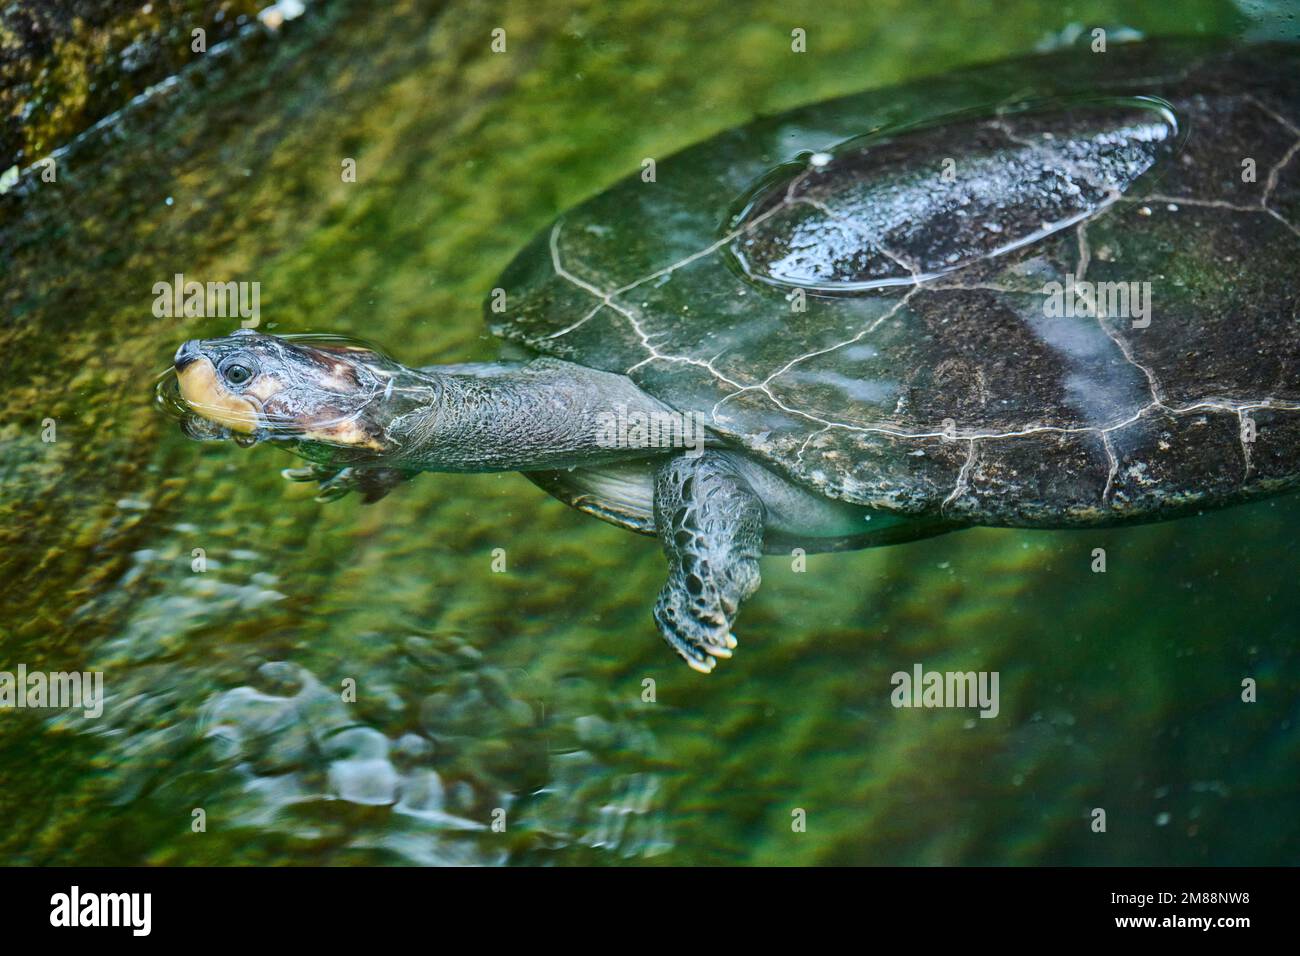 Yellow-spotted Amazon river turtle (Podocnemis unifilis) swimming in a water, captive, South America Stock Photo